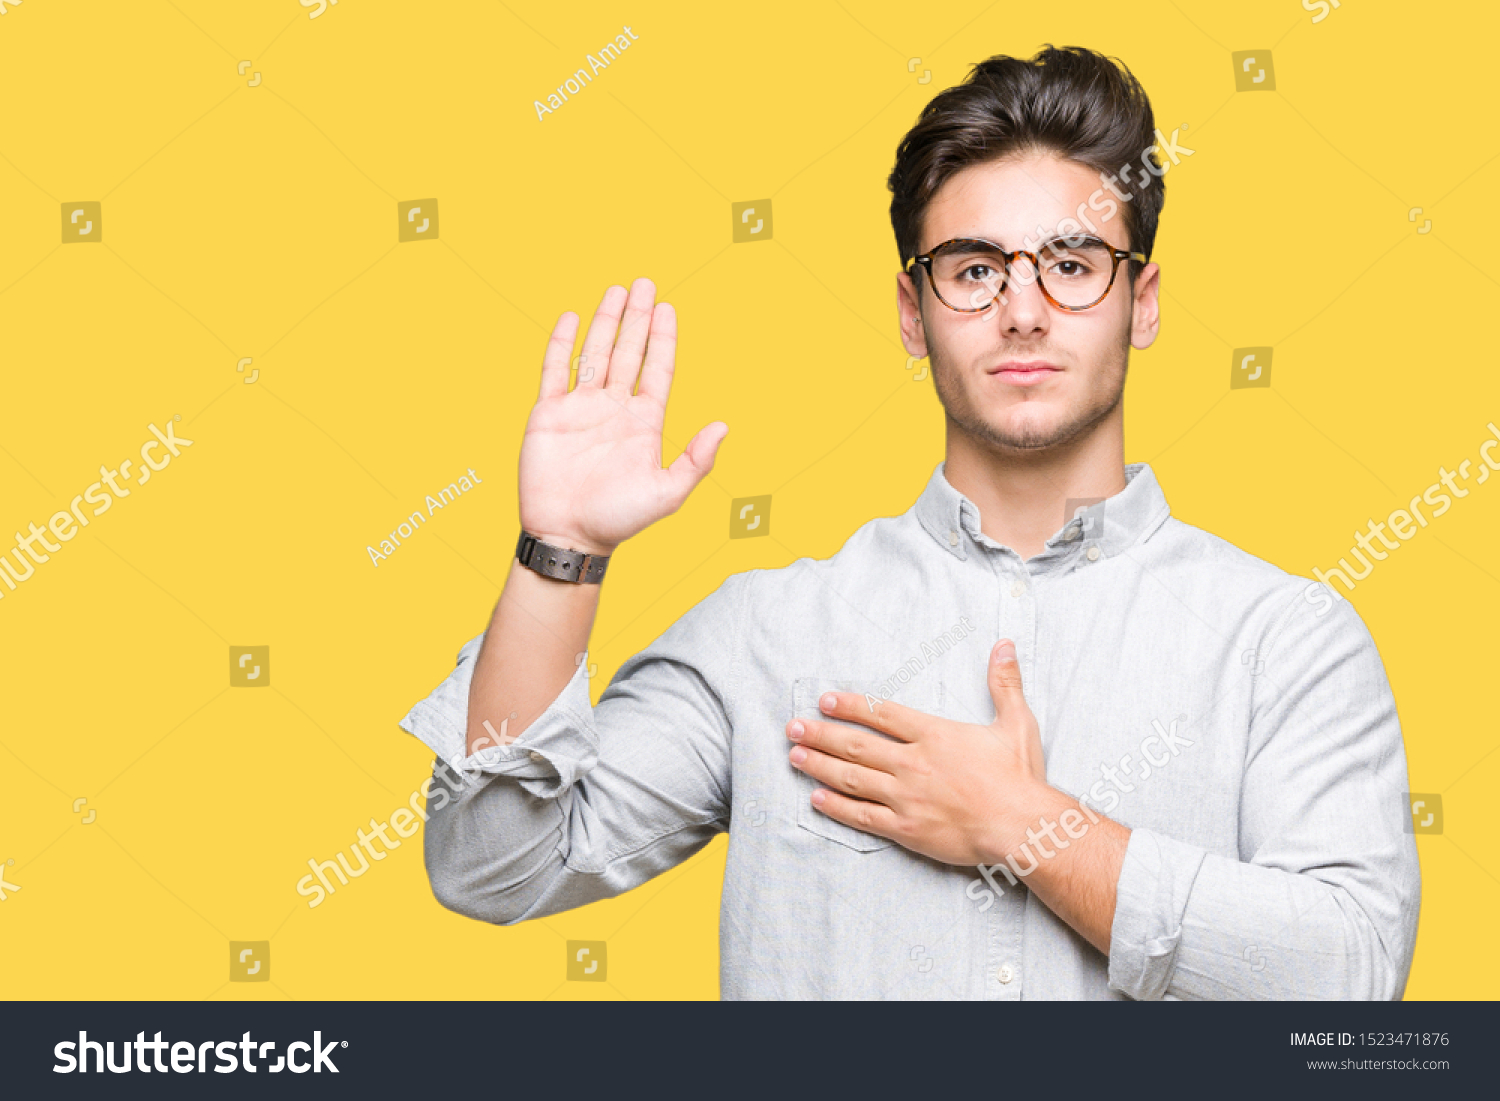 Young handsome man wearing glasses over isolated background Swearing with hand on chest and open palm, making a loyalty promise oath #1523471876